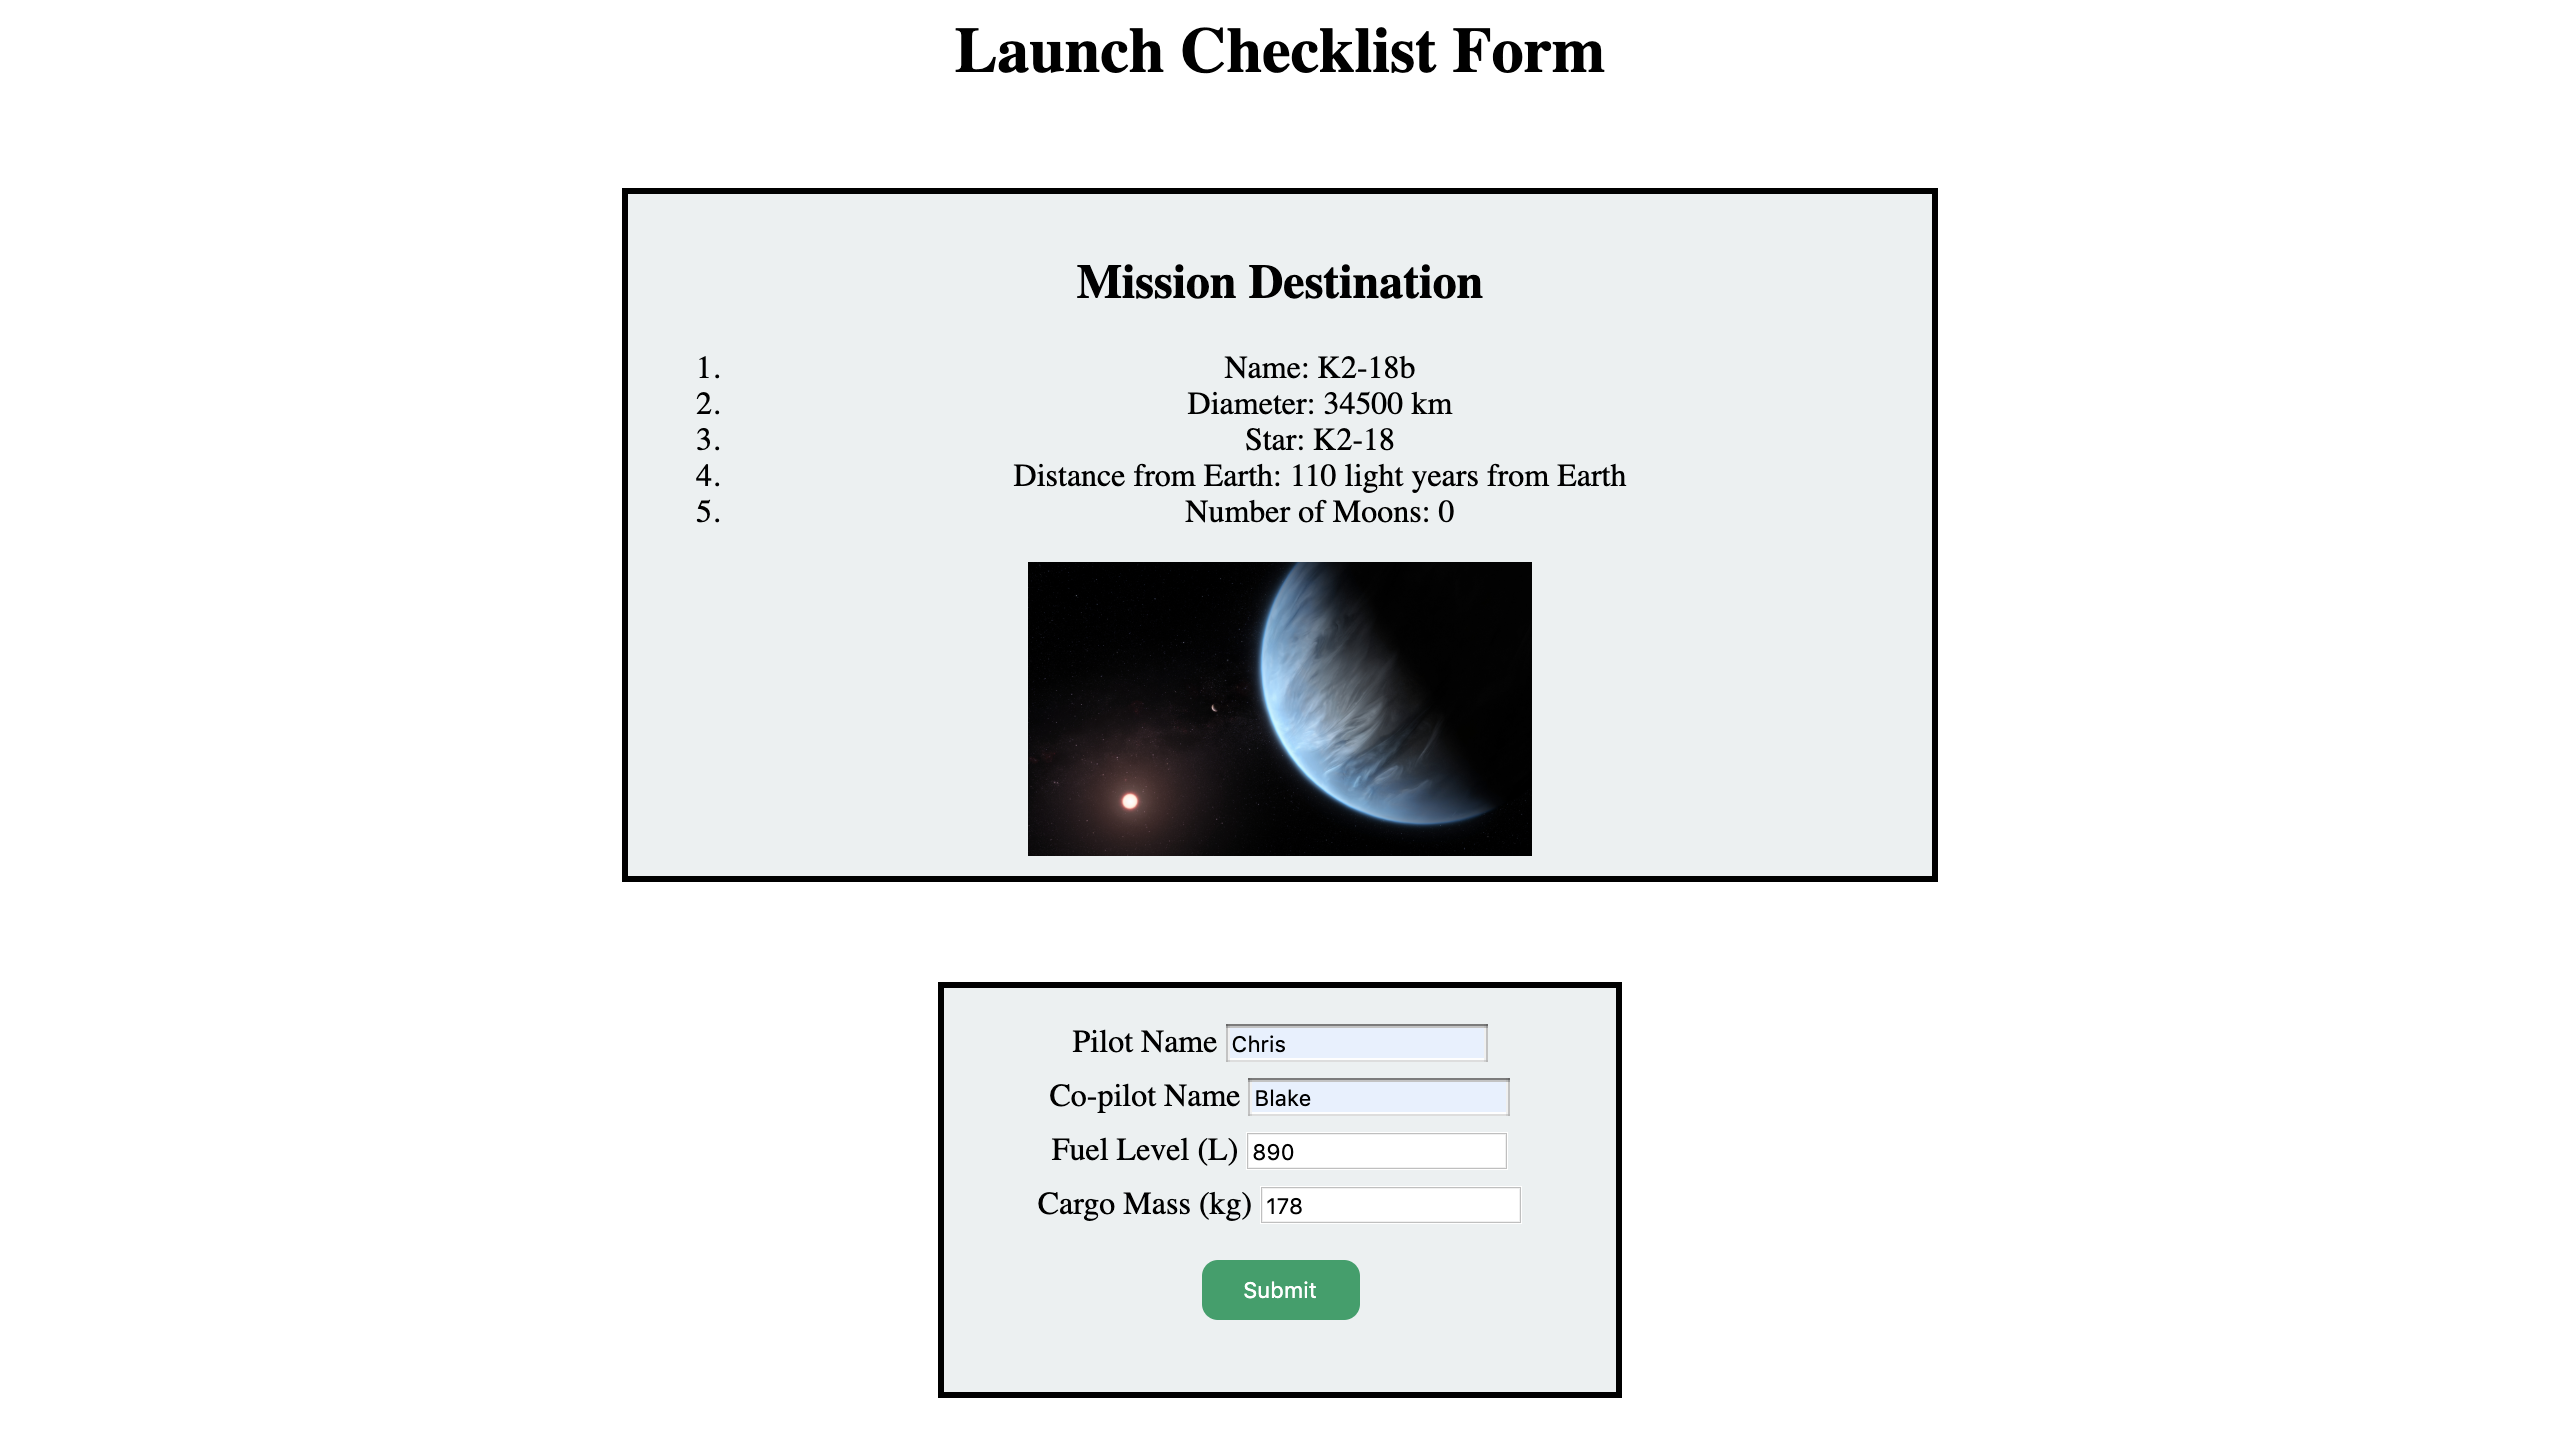 Image showing the user is submitting a form with Chris as the pilot, Blake as the co-pilot, 890 liters as the fuel level, and 178 kilograms as the cargo mass.